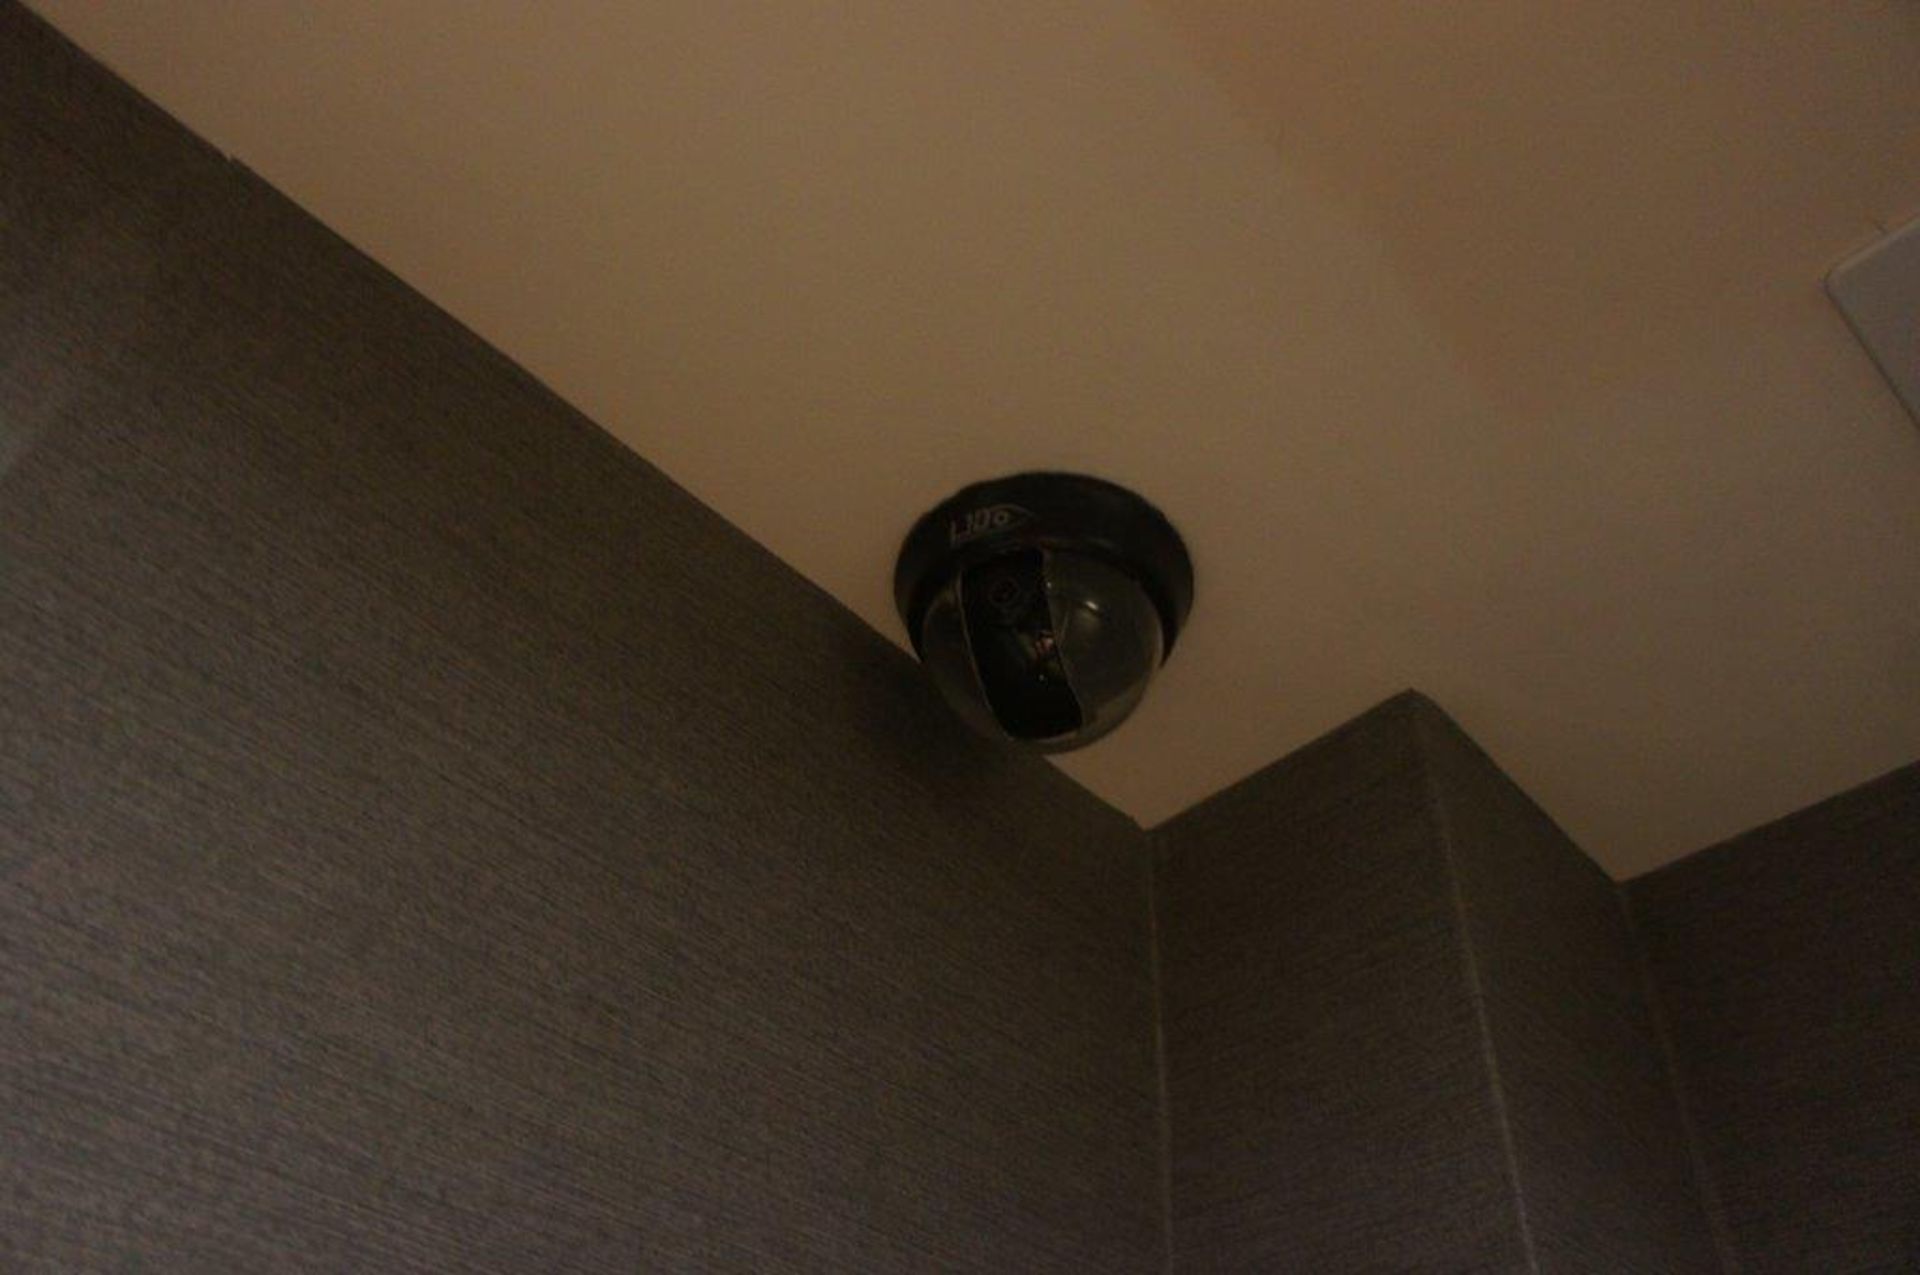 CCTV System Throughout - Image 2 of 2